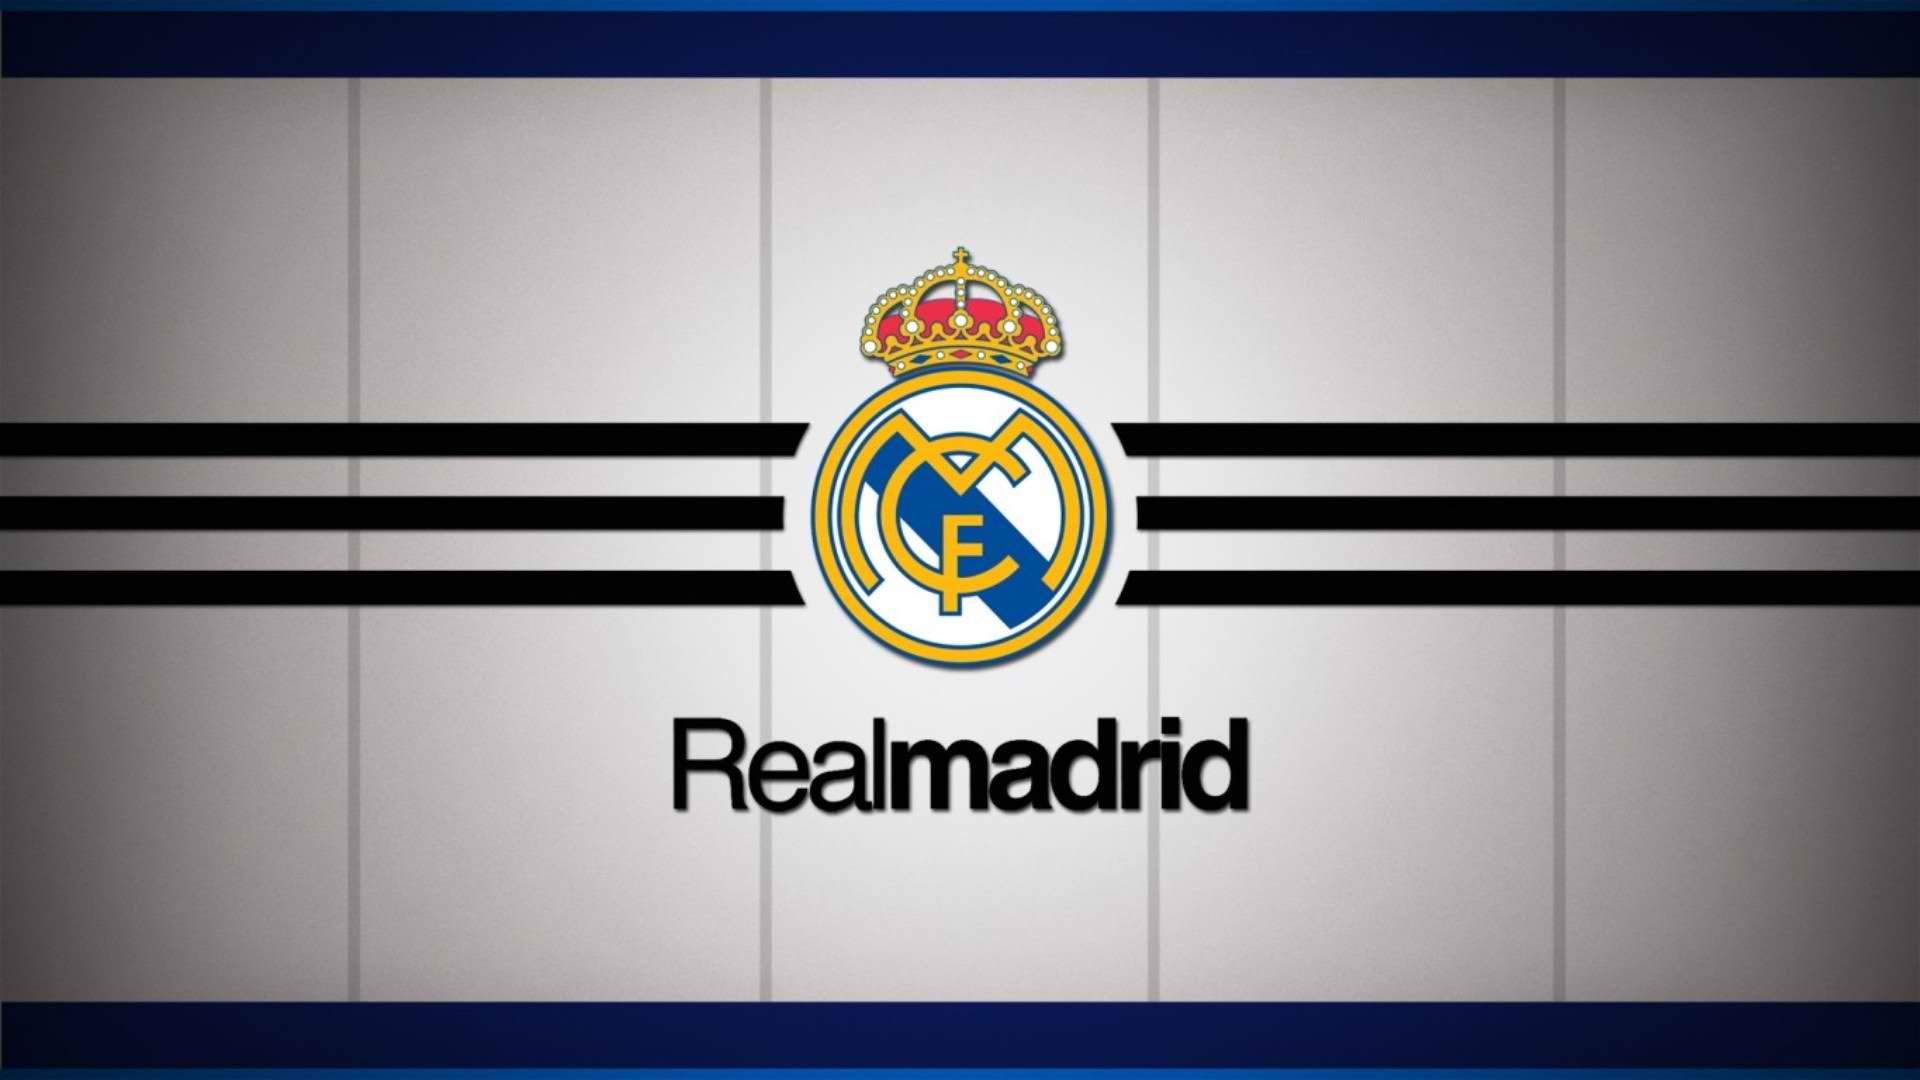 HD Real Madrid Wallpapers with resolution 1920x1080 pixel. You can make this wallpaper for your Mac or Windows Desktop Background, iPhone, Android or Tablet and another Smartphone device